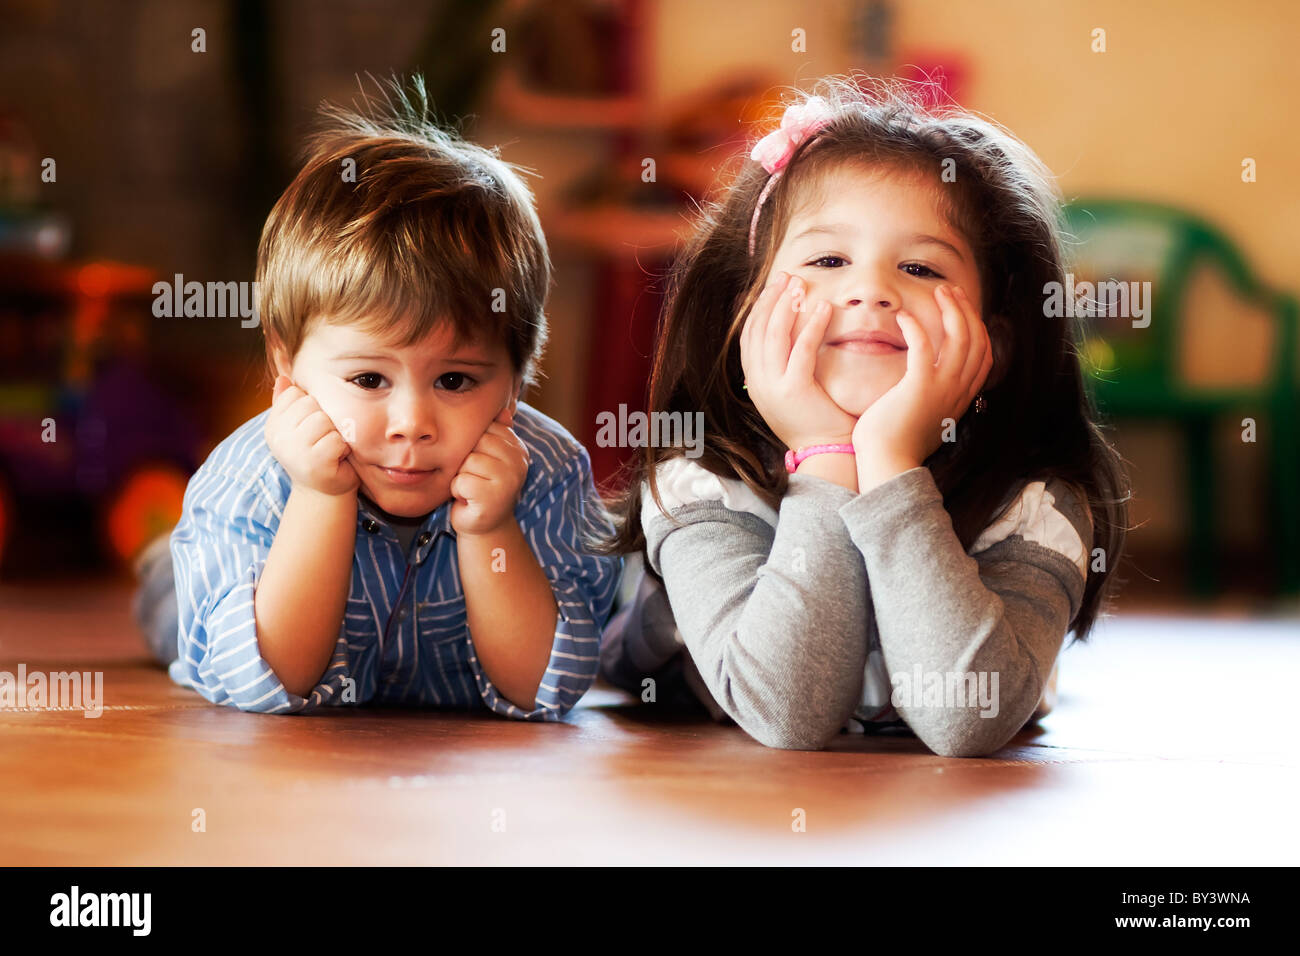 Children, brother and sister posing Stock Photo